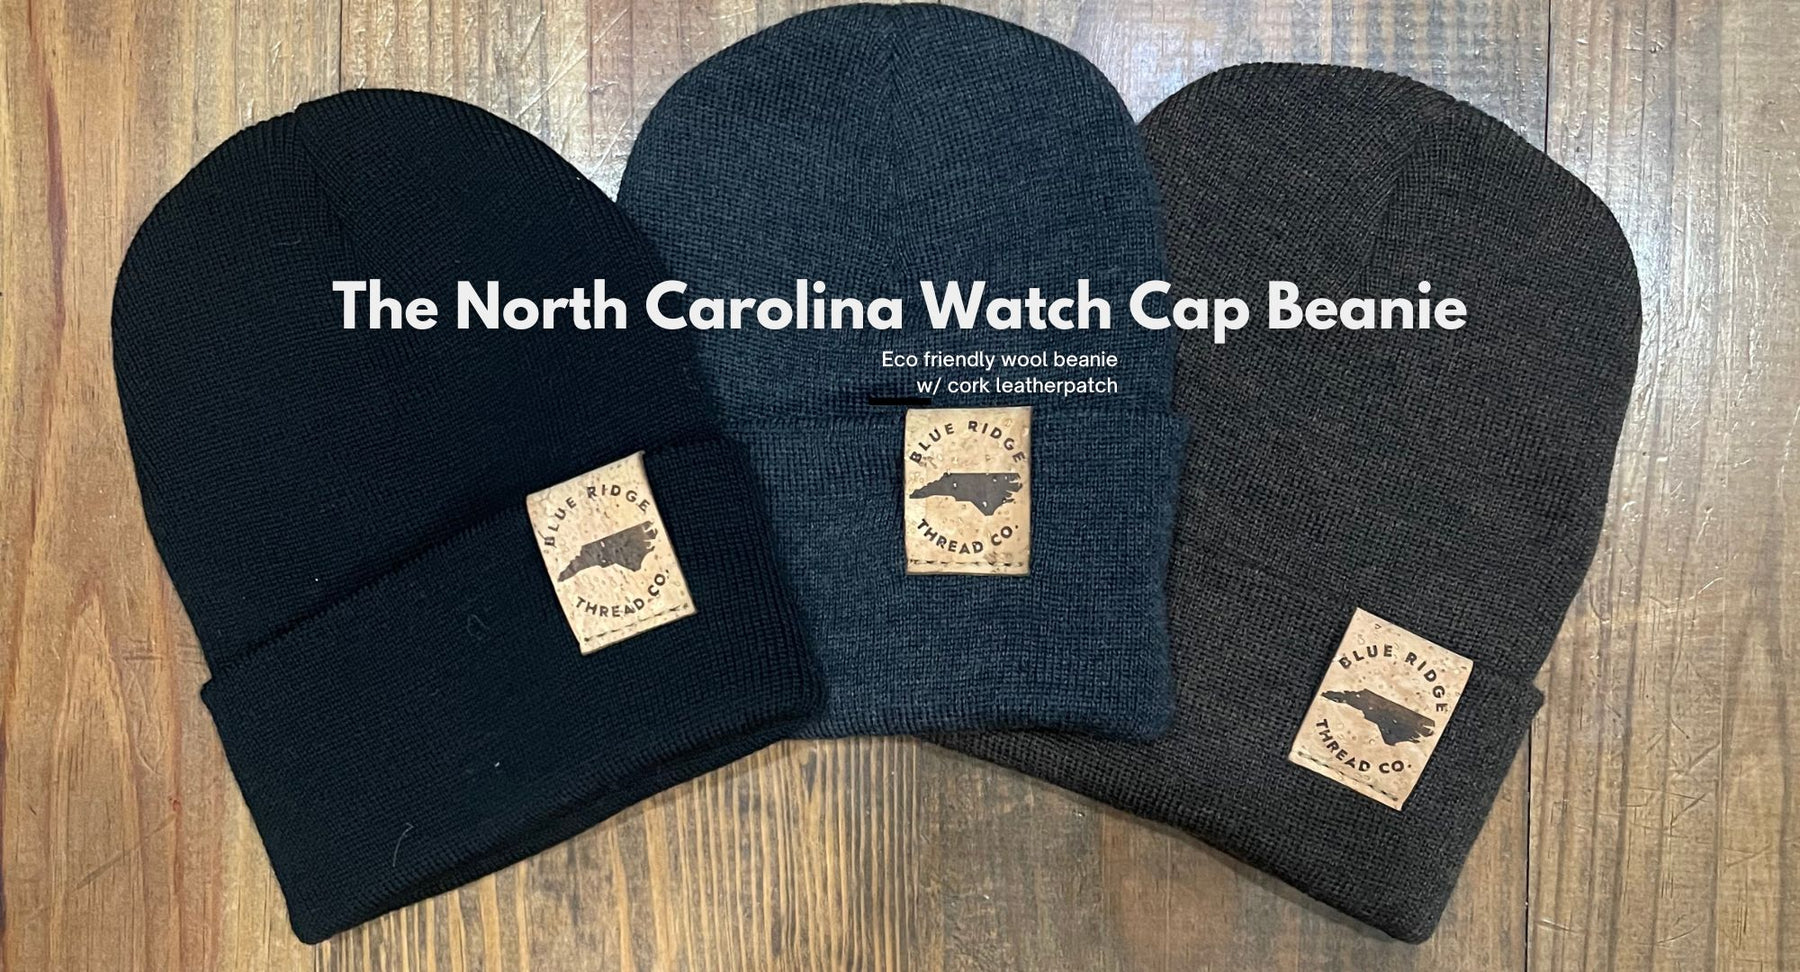 Eco friendly 100% merino wool watchcap beanie with elk cork leather tag in black, brown, and charcoal